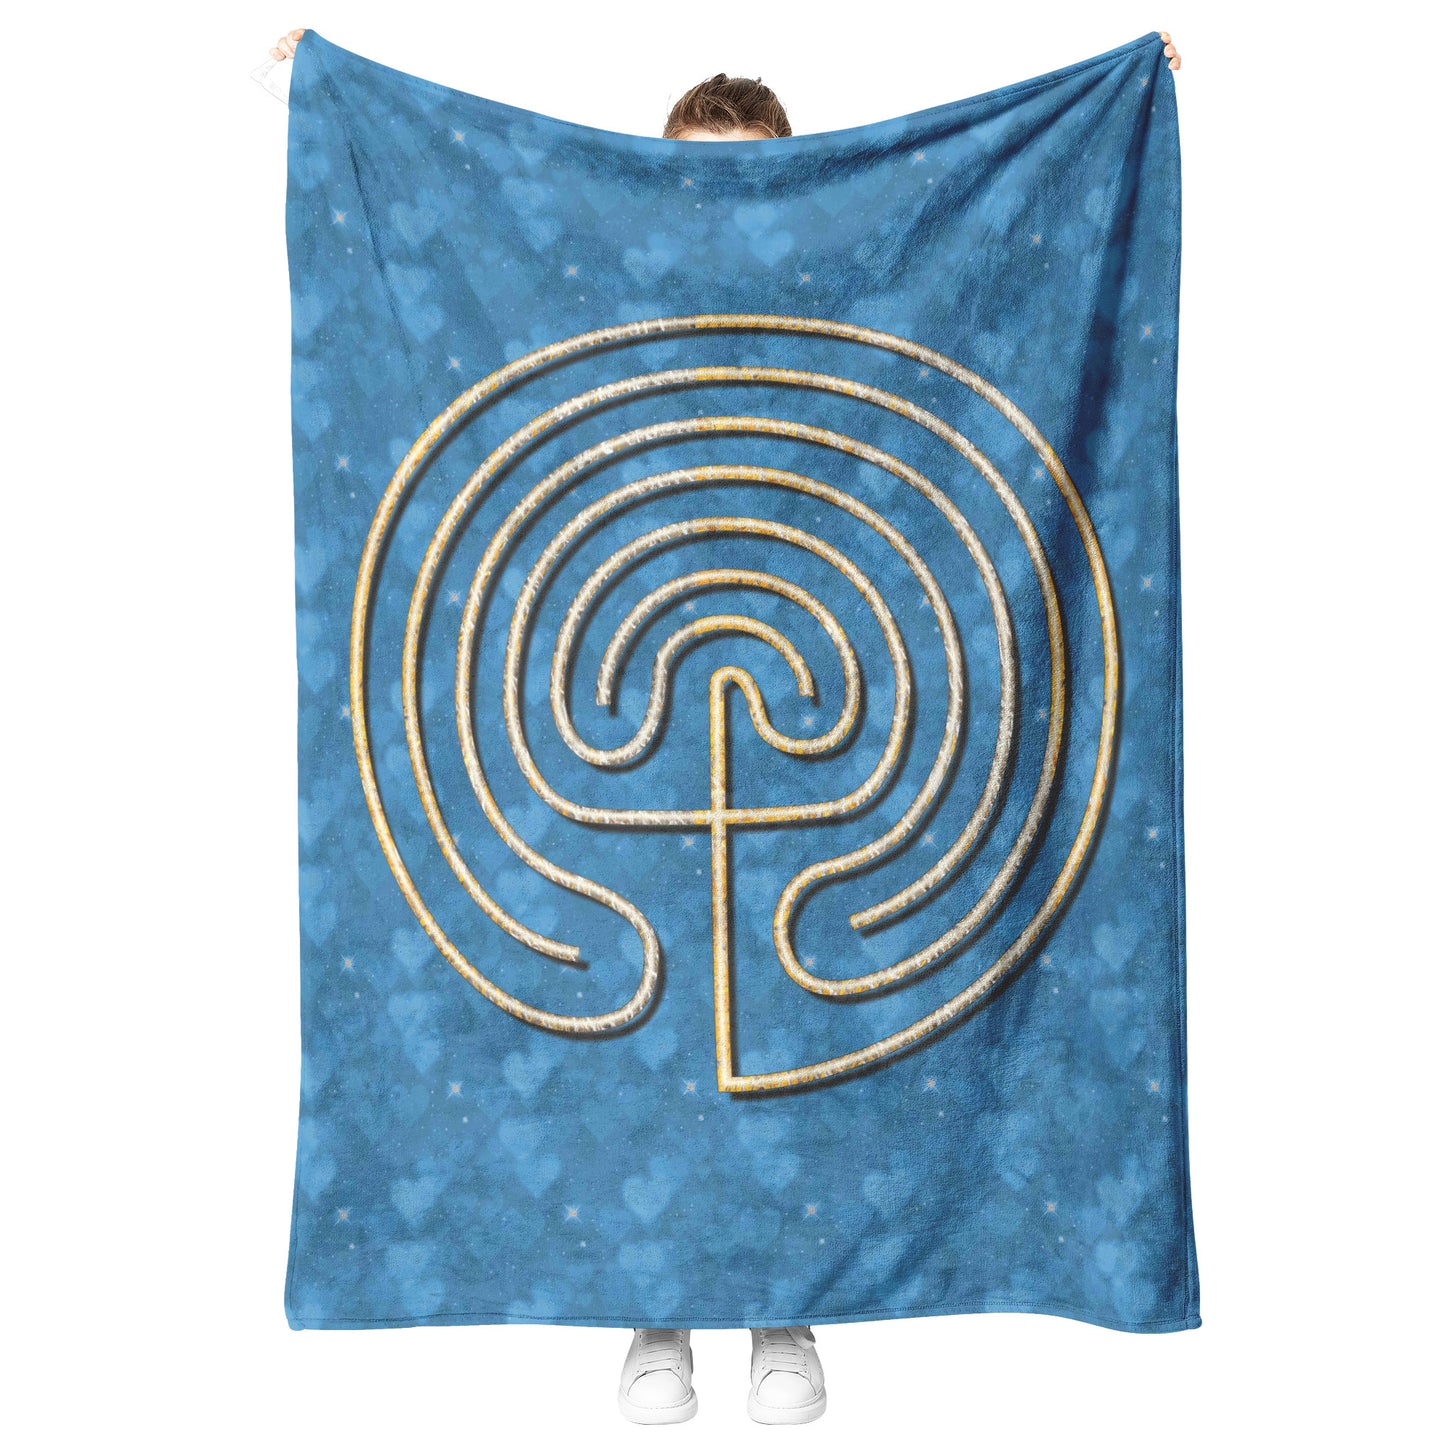 Cretian Labyrinth Therapy Blanket - Blue